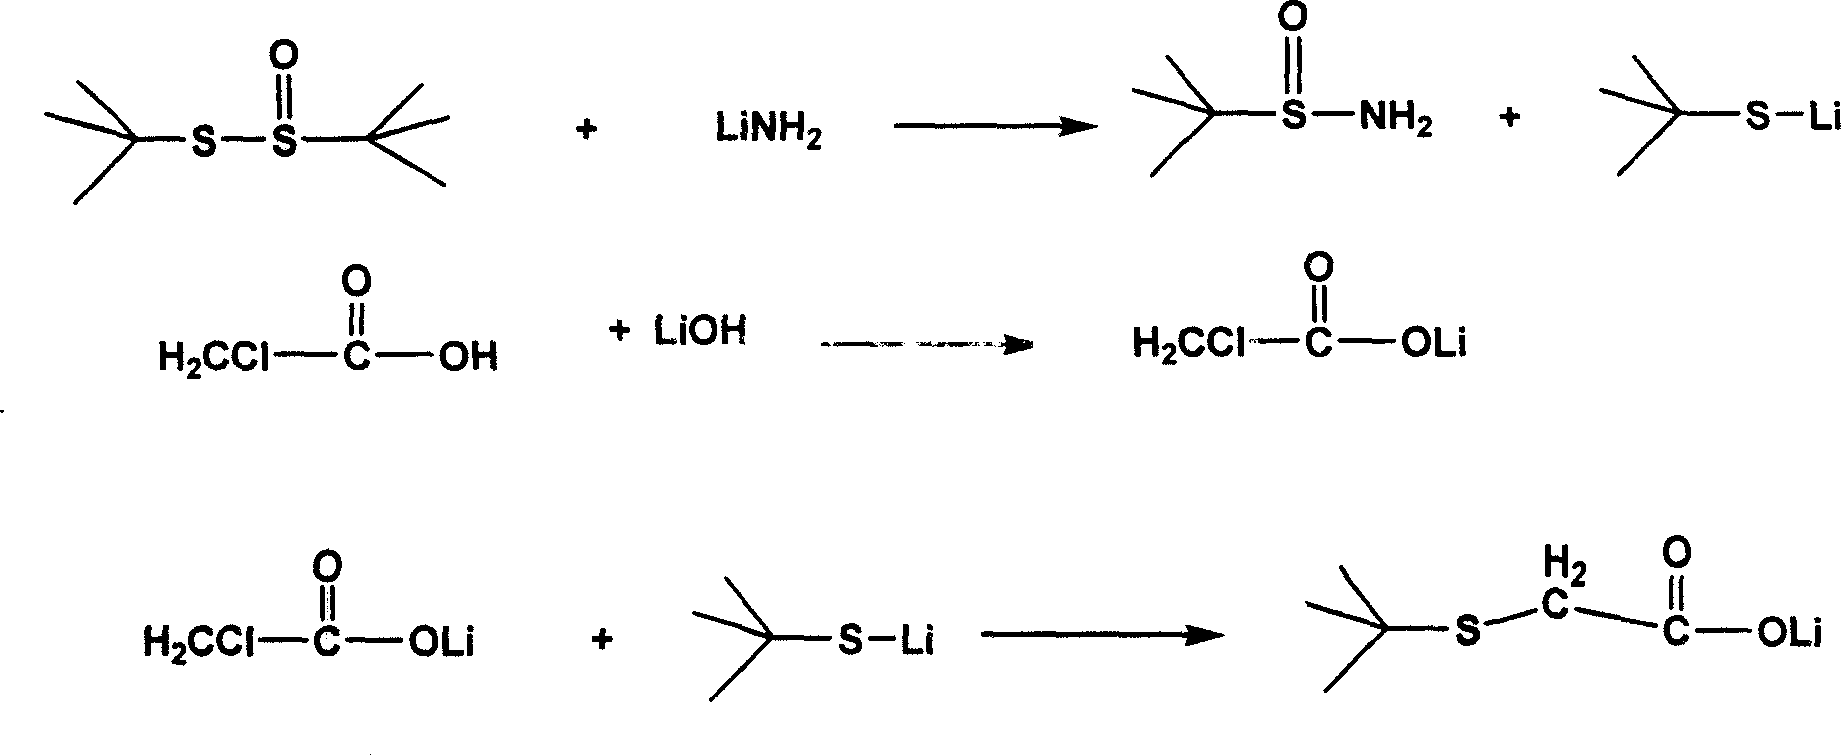 Deodoration method in procedure for industrialized synthesizing chirality sulfenamide